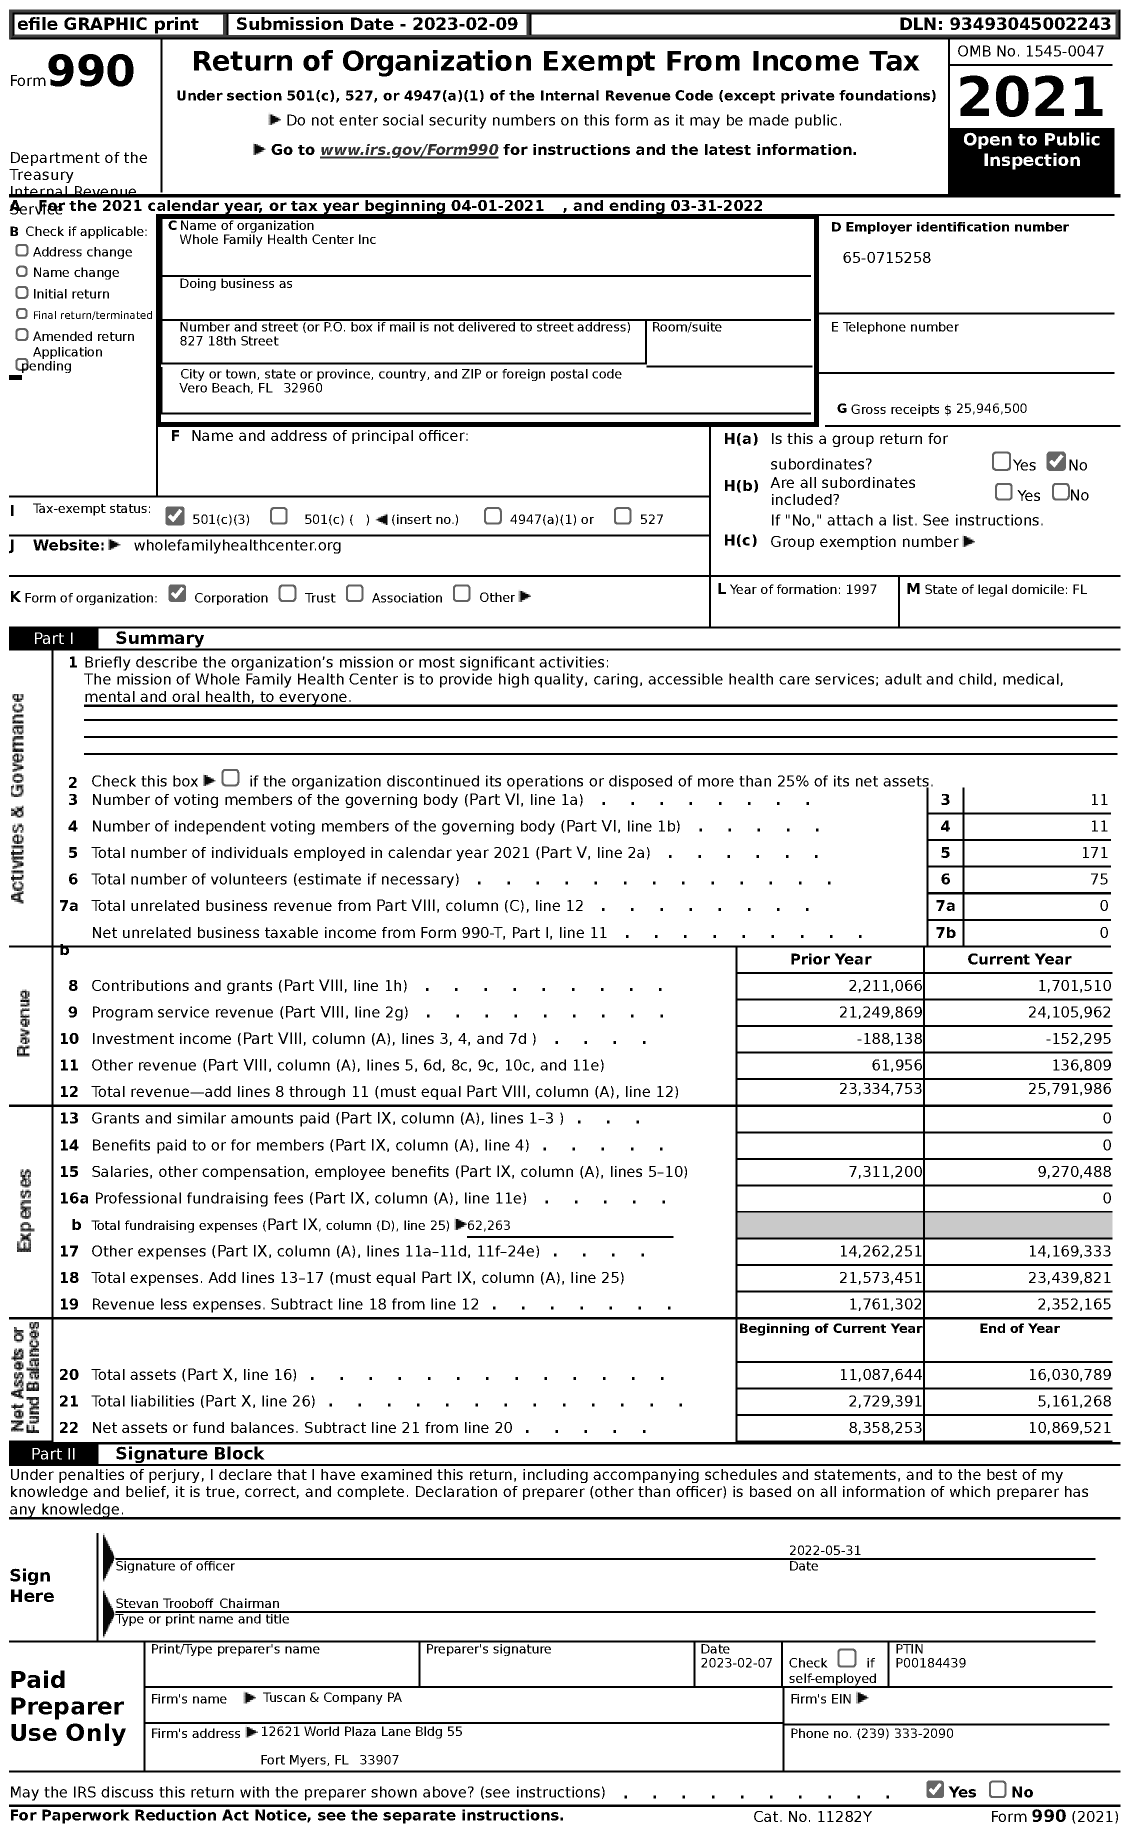 Image of first page of 2021 Form 990 for Whole Family Health Center (WFHC)